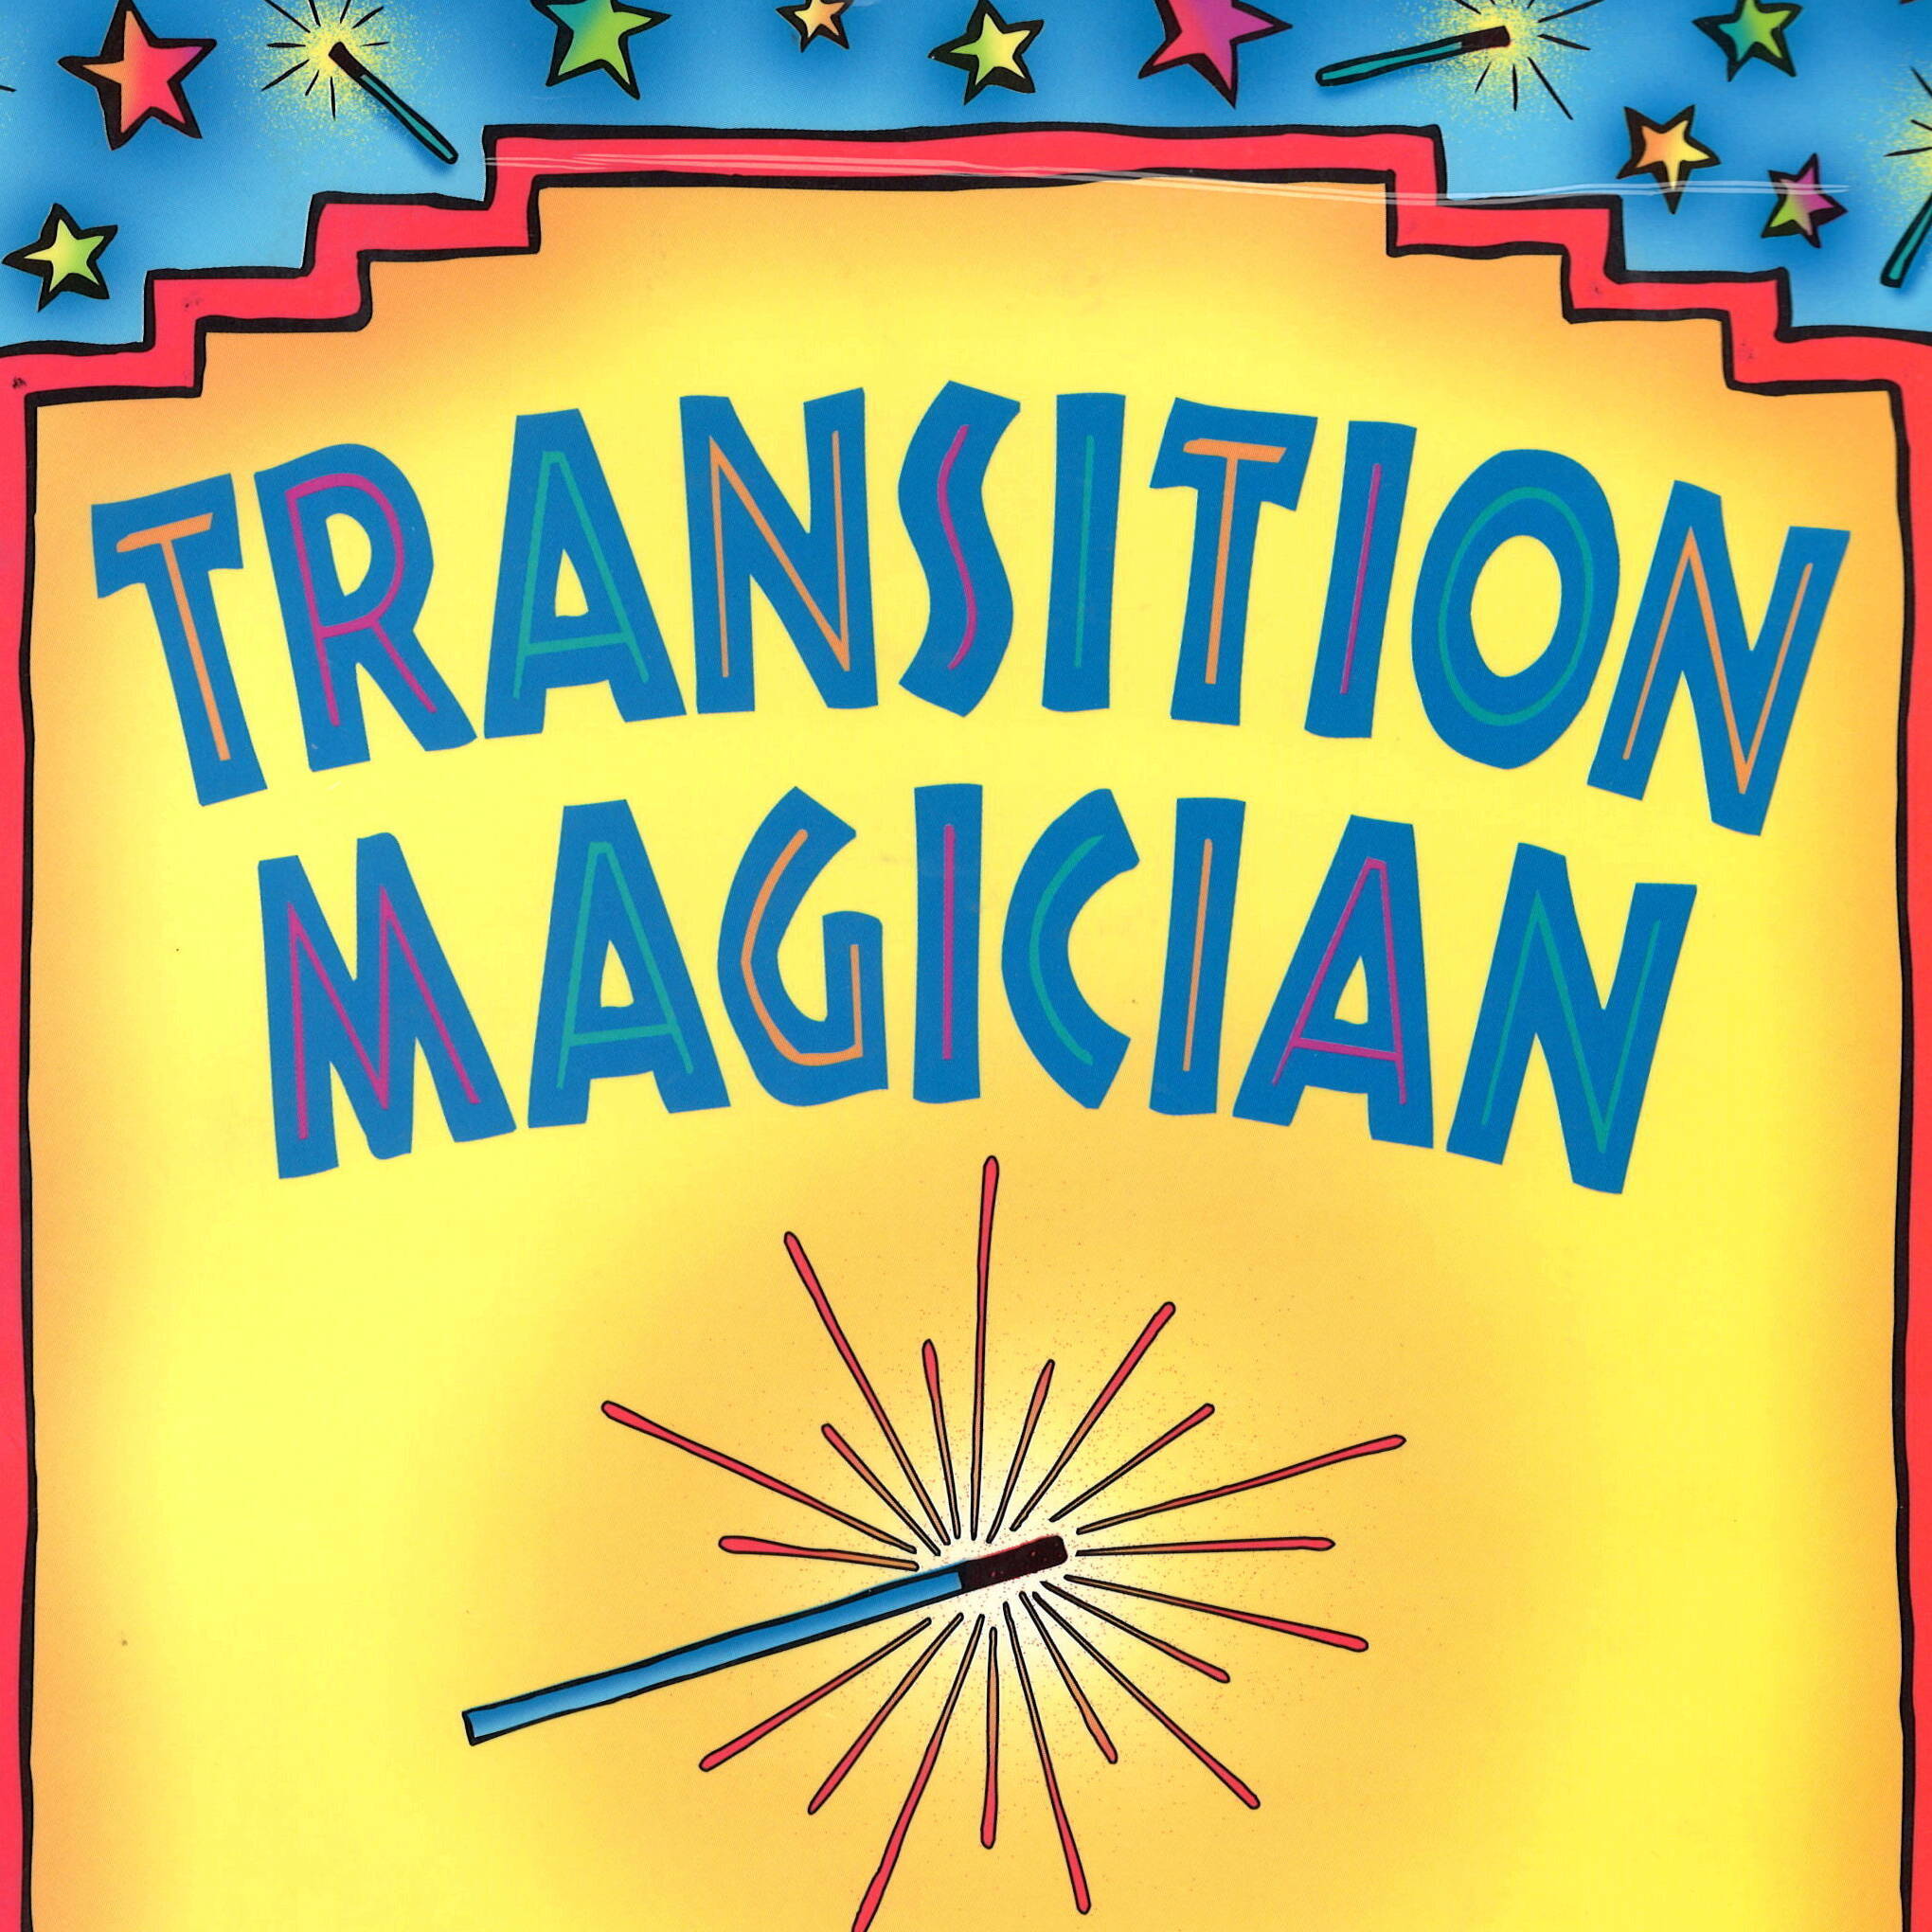 The Transition Magician Endowed Scholarship